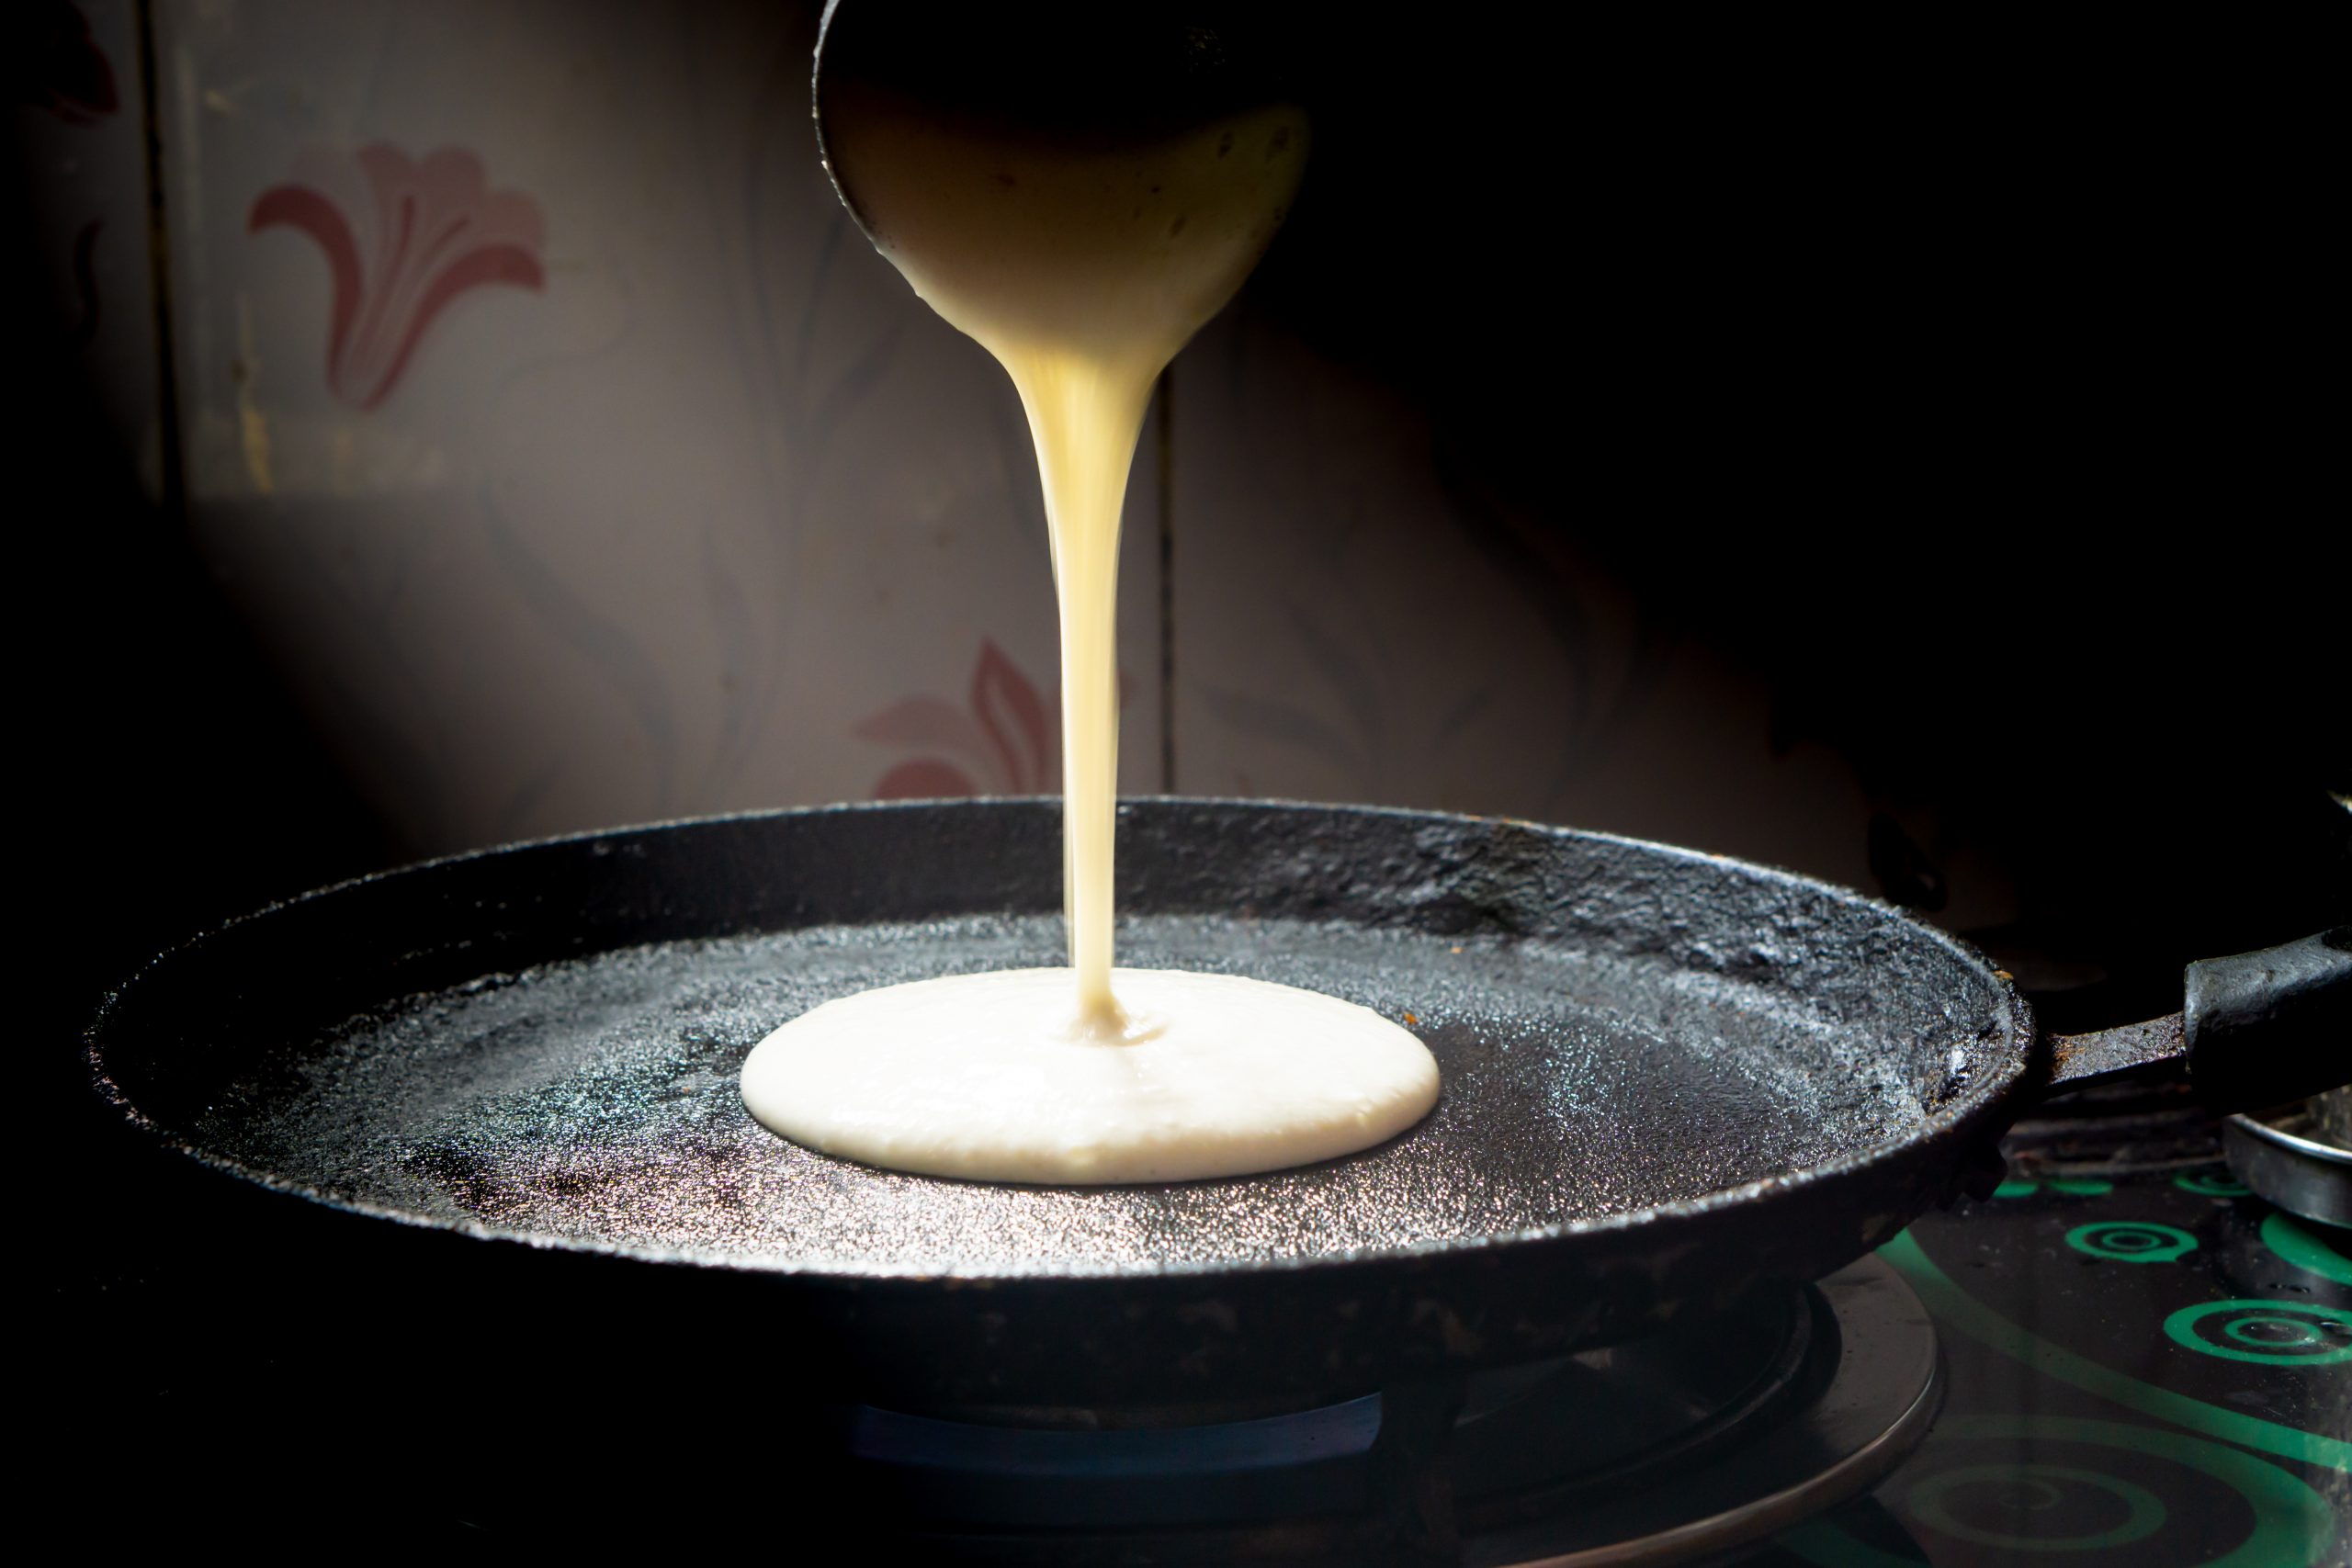 Dosa batter is being poured on pan